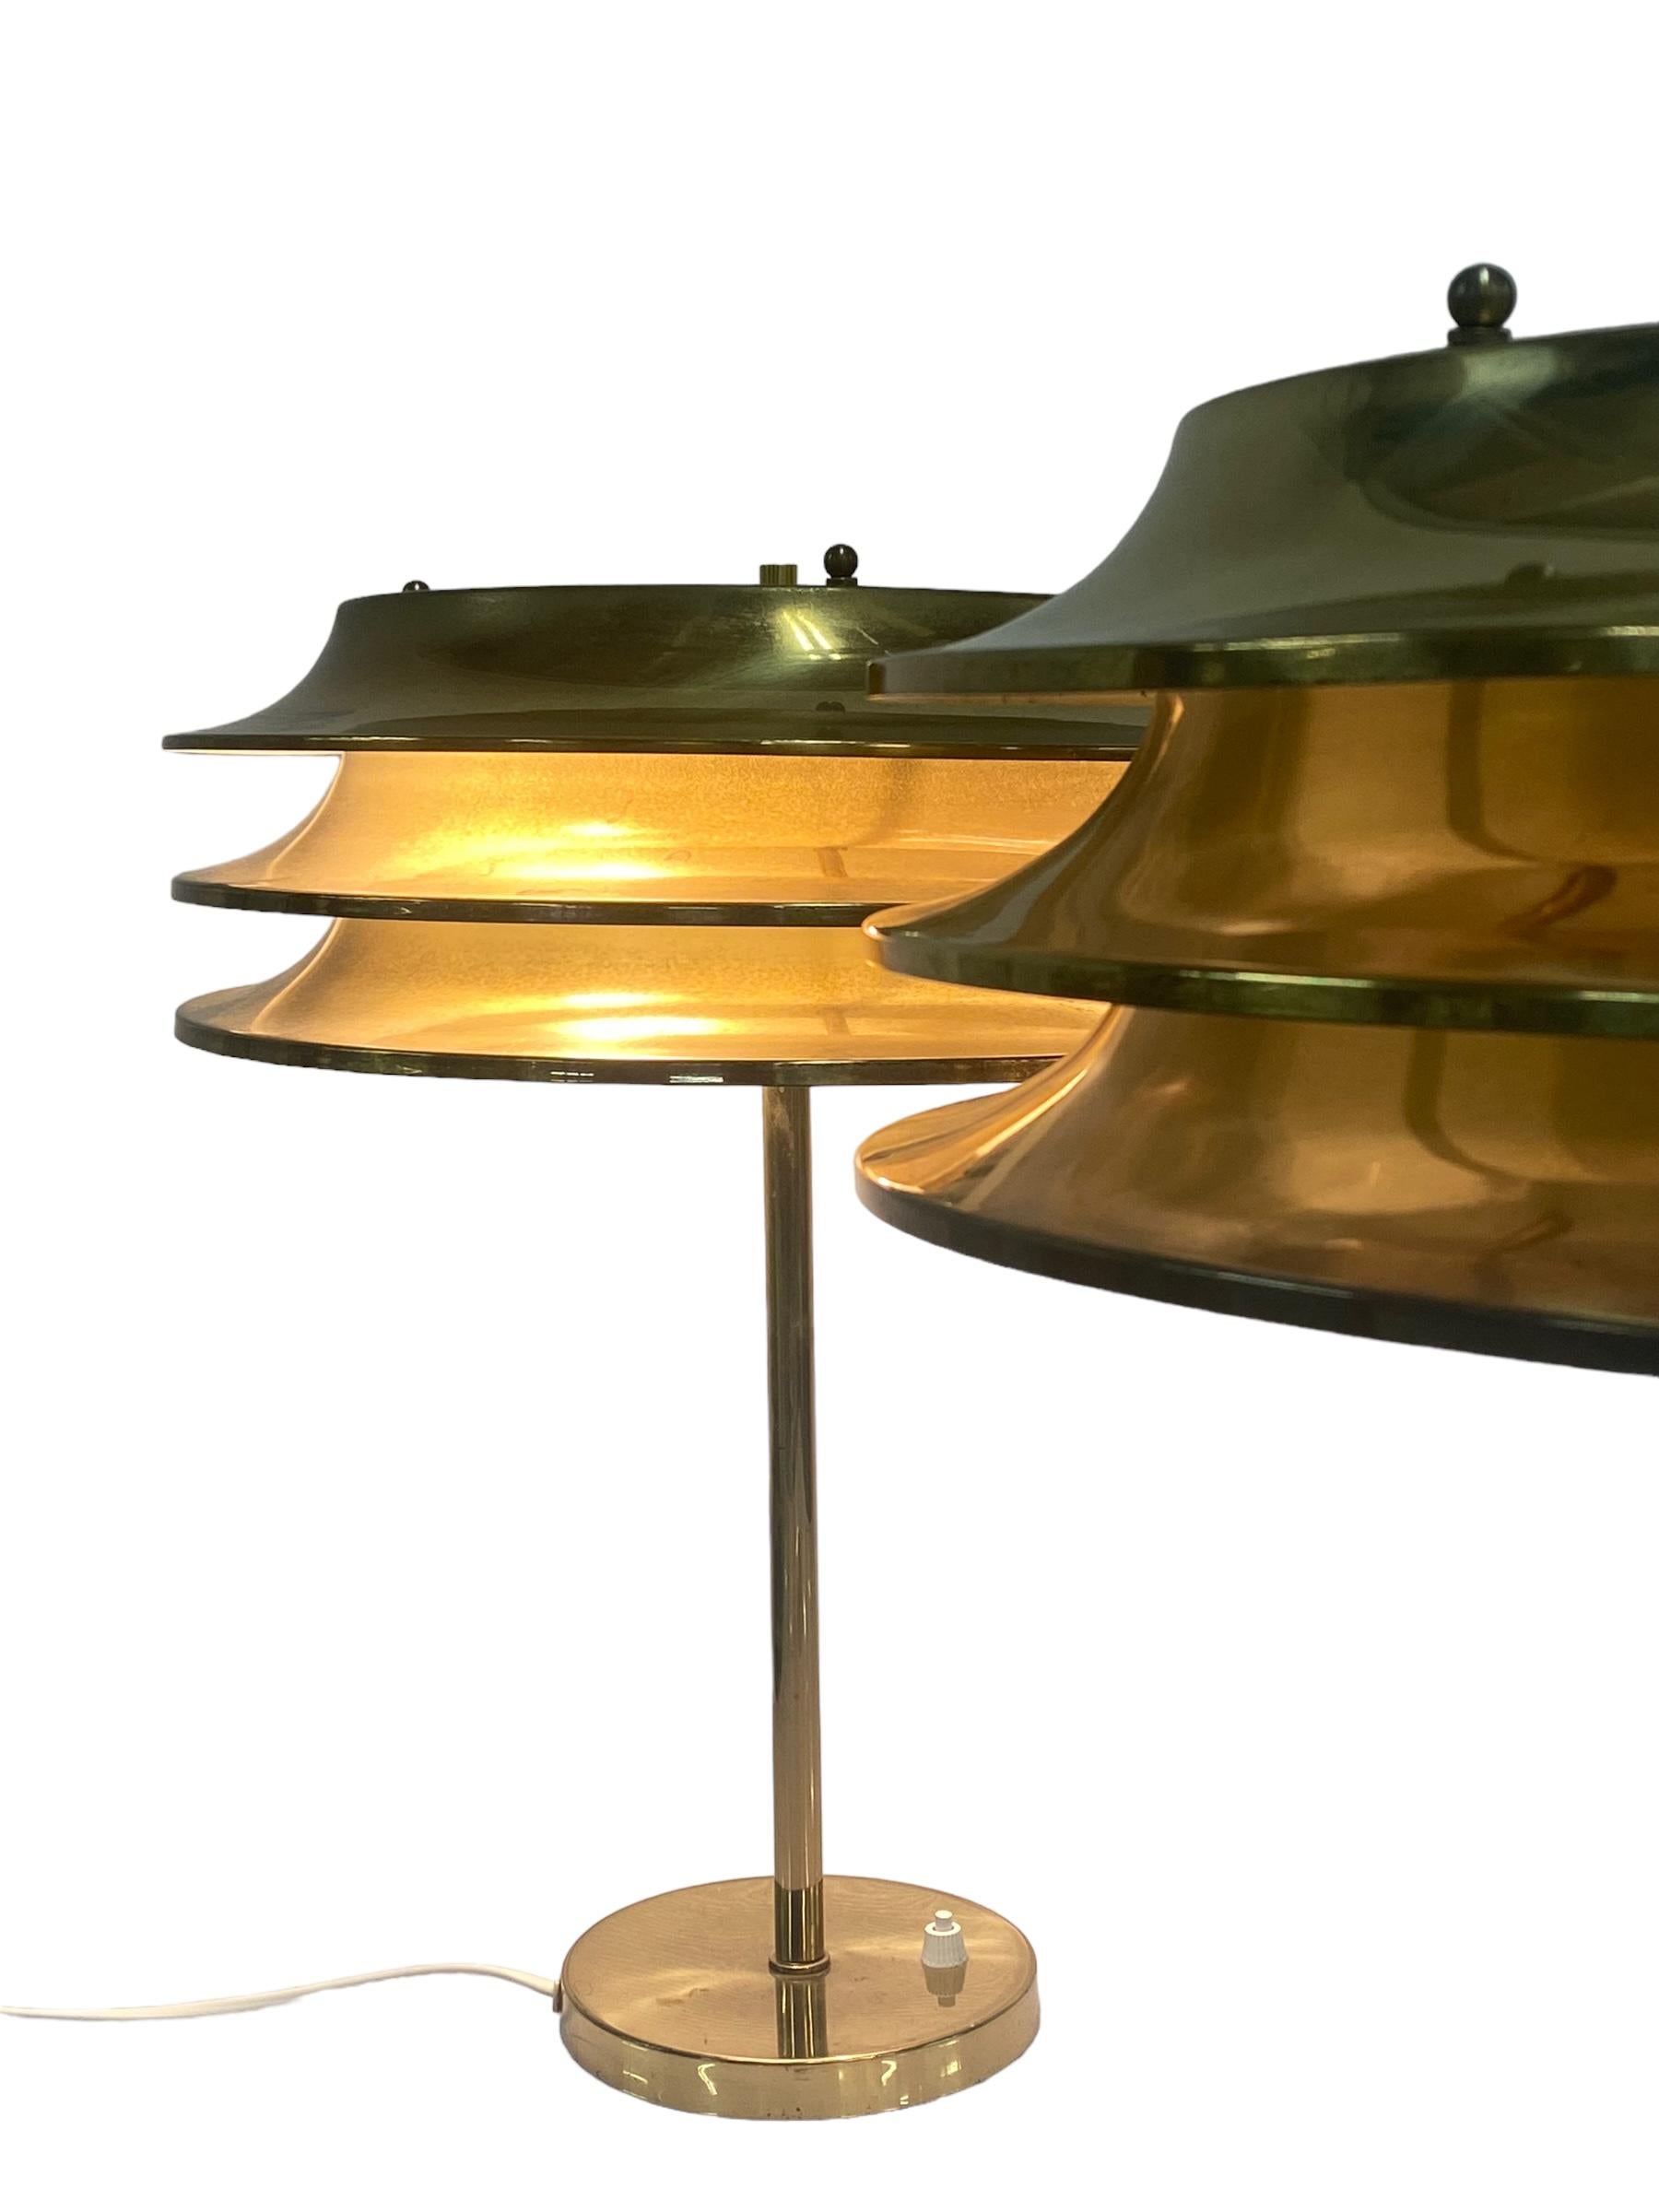 Finnish A Pair of Kai Ruokonen 'Finnmark' Table Lamps for the Vaakuna Hotel, Lynx, 1970s For Sale